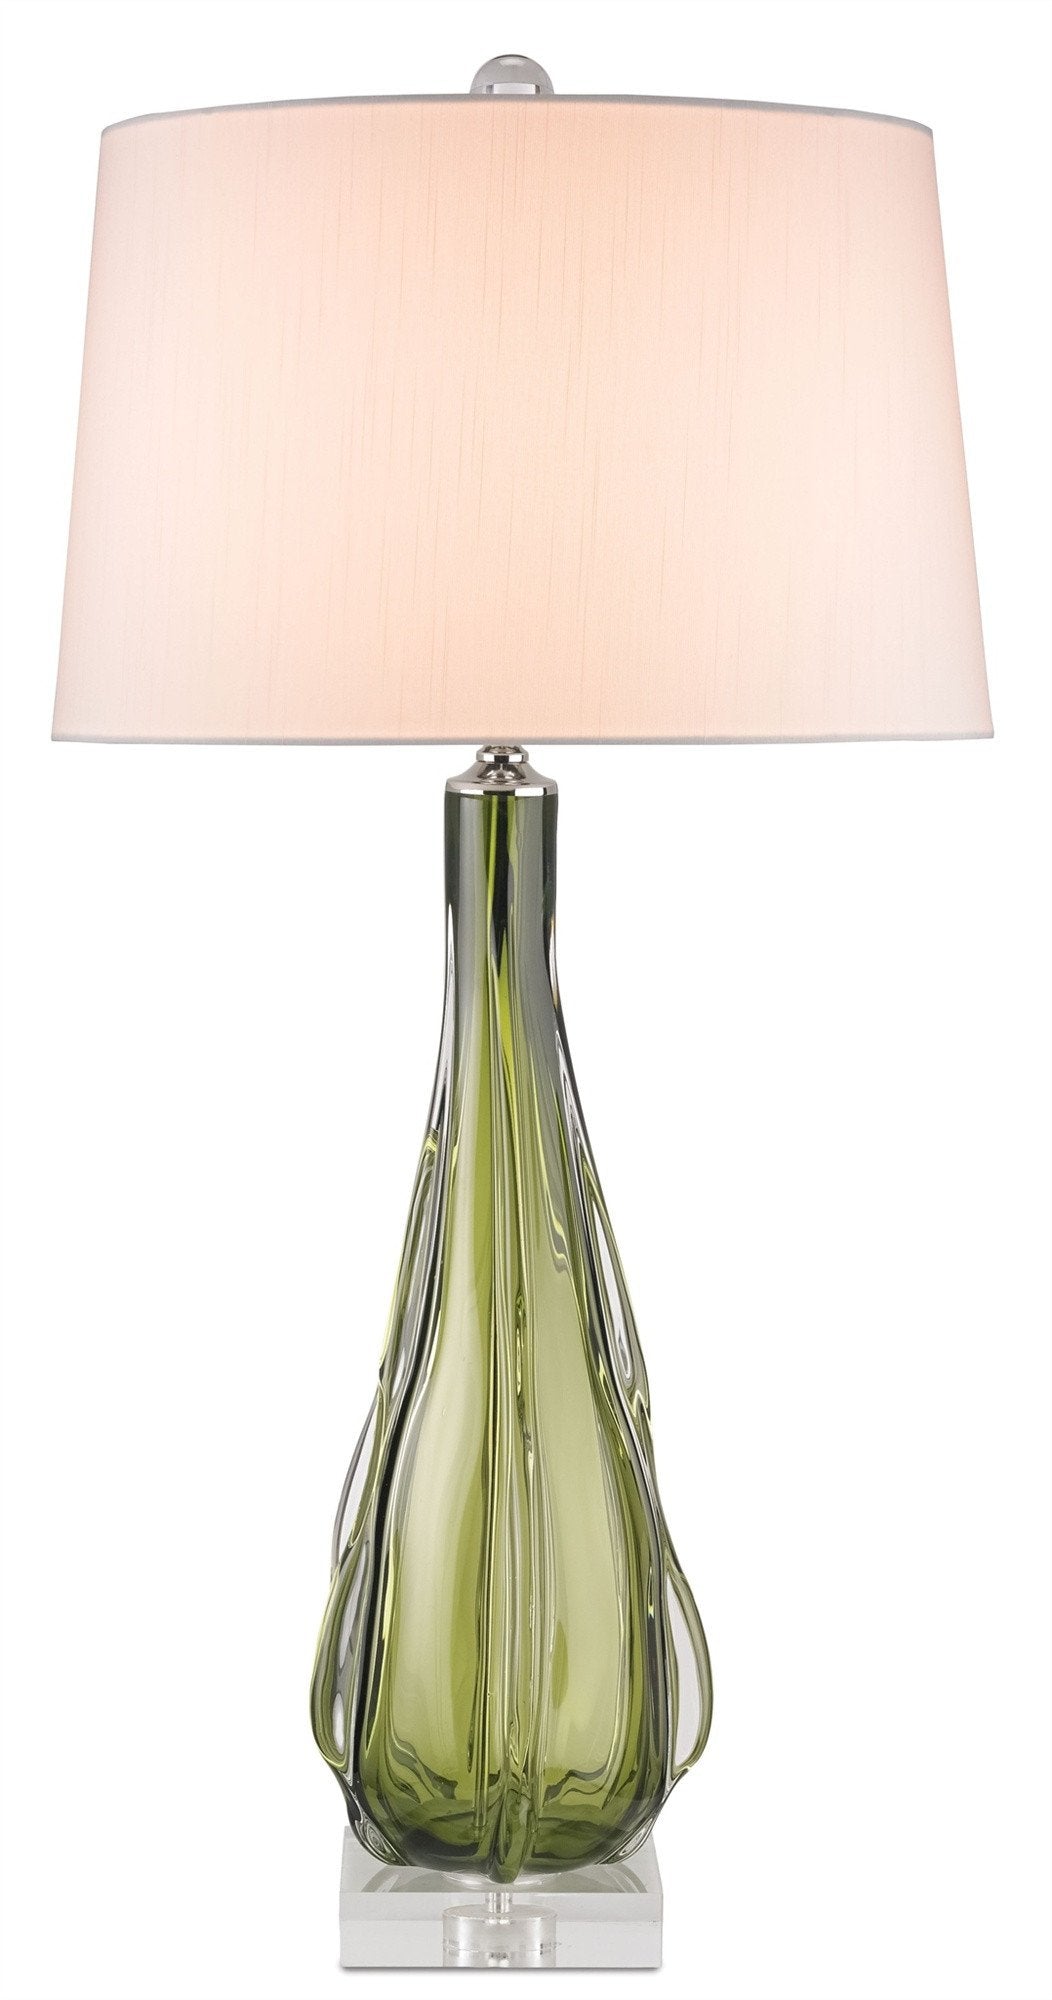 Zephyr Table Lamp design by Currey and Company